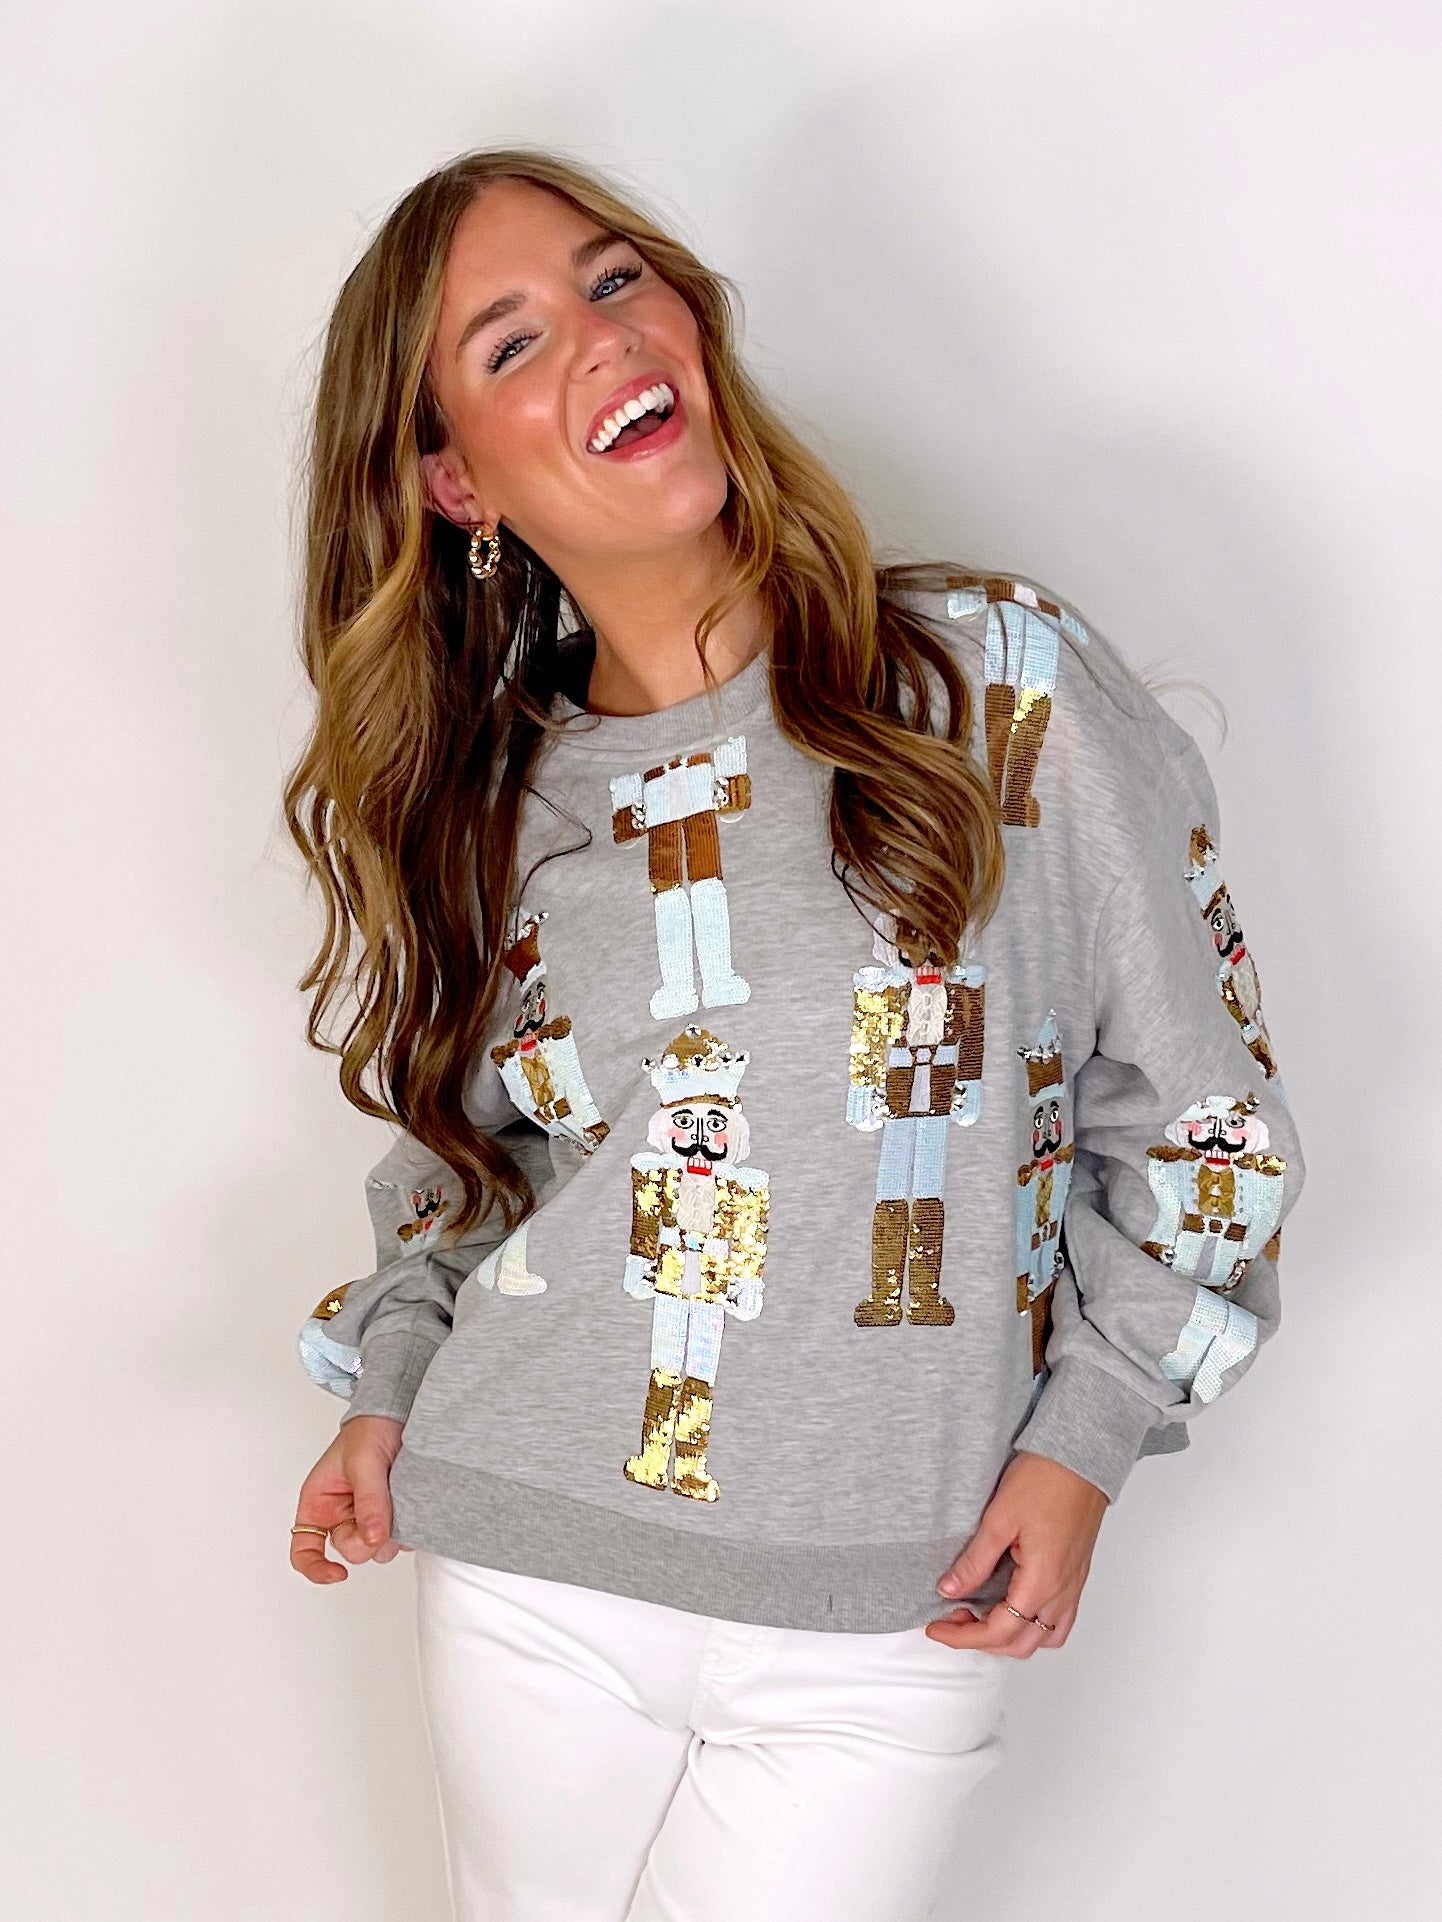 Queen of Nutcrackers Sweatshirt | Queen of Sparkles-Sweatshirt-Queen of Sparkles-The Village Shoppe, Women’s Fashion Boutique, Shop Online and In Store - Located in Muscle Shoals, AL.